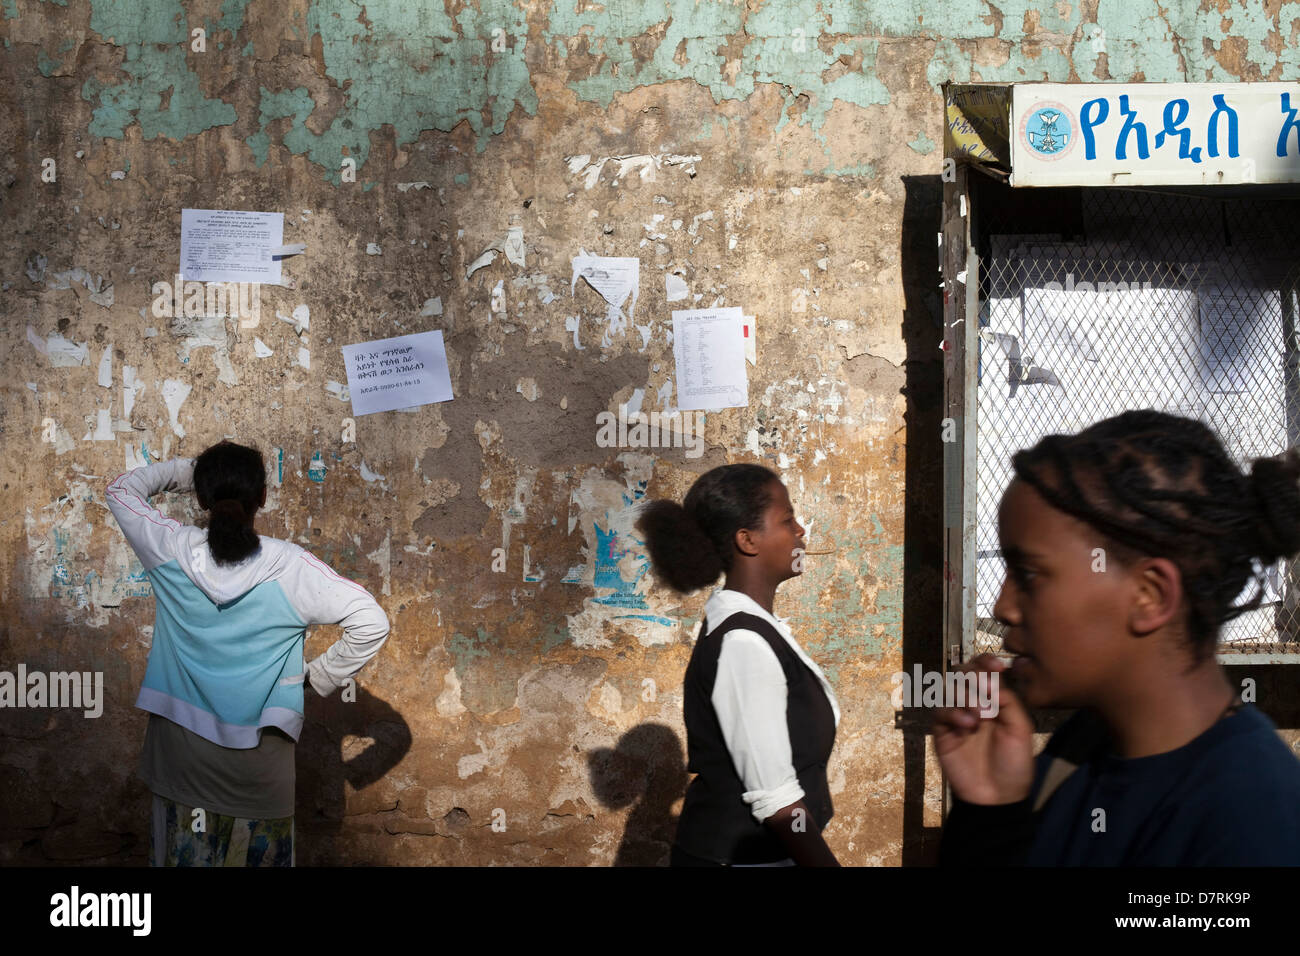 A woman looks at a poster advertising jobs on the street, Addis Ababa, Ethiopia. Stock Photo